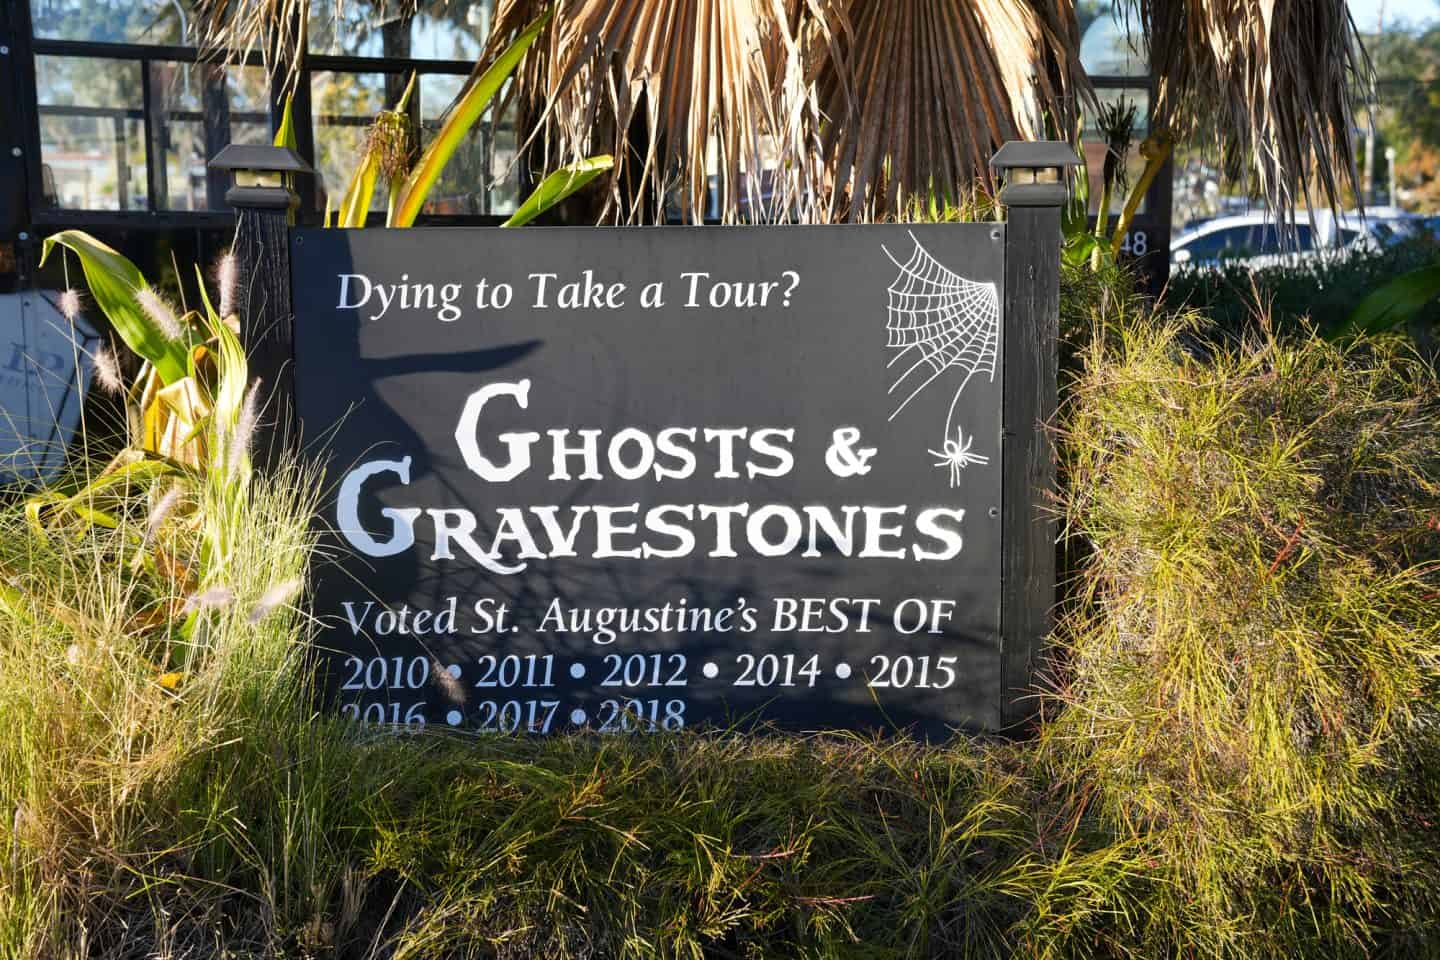 Sign for a ghost tour